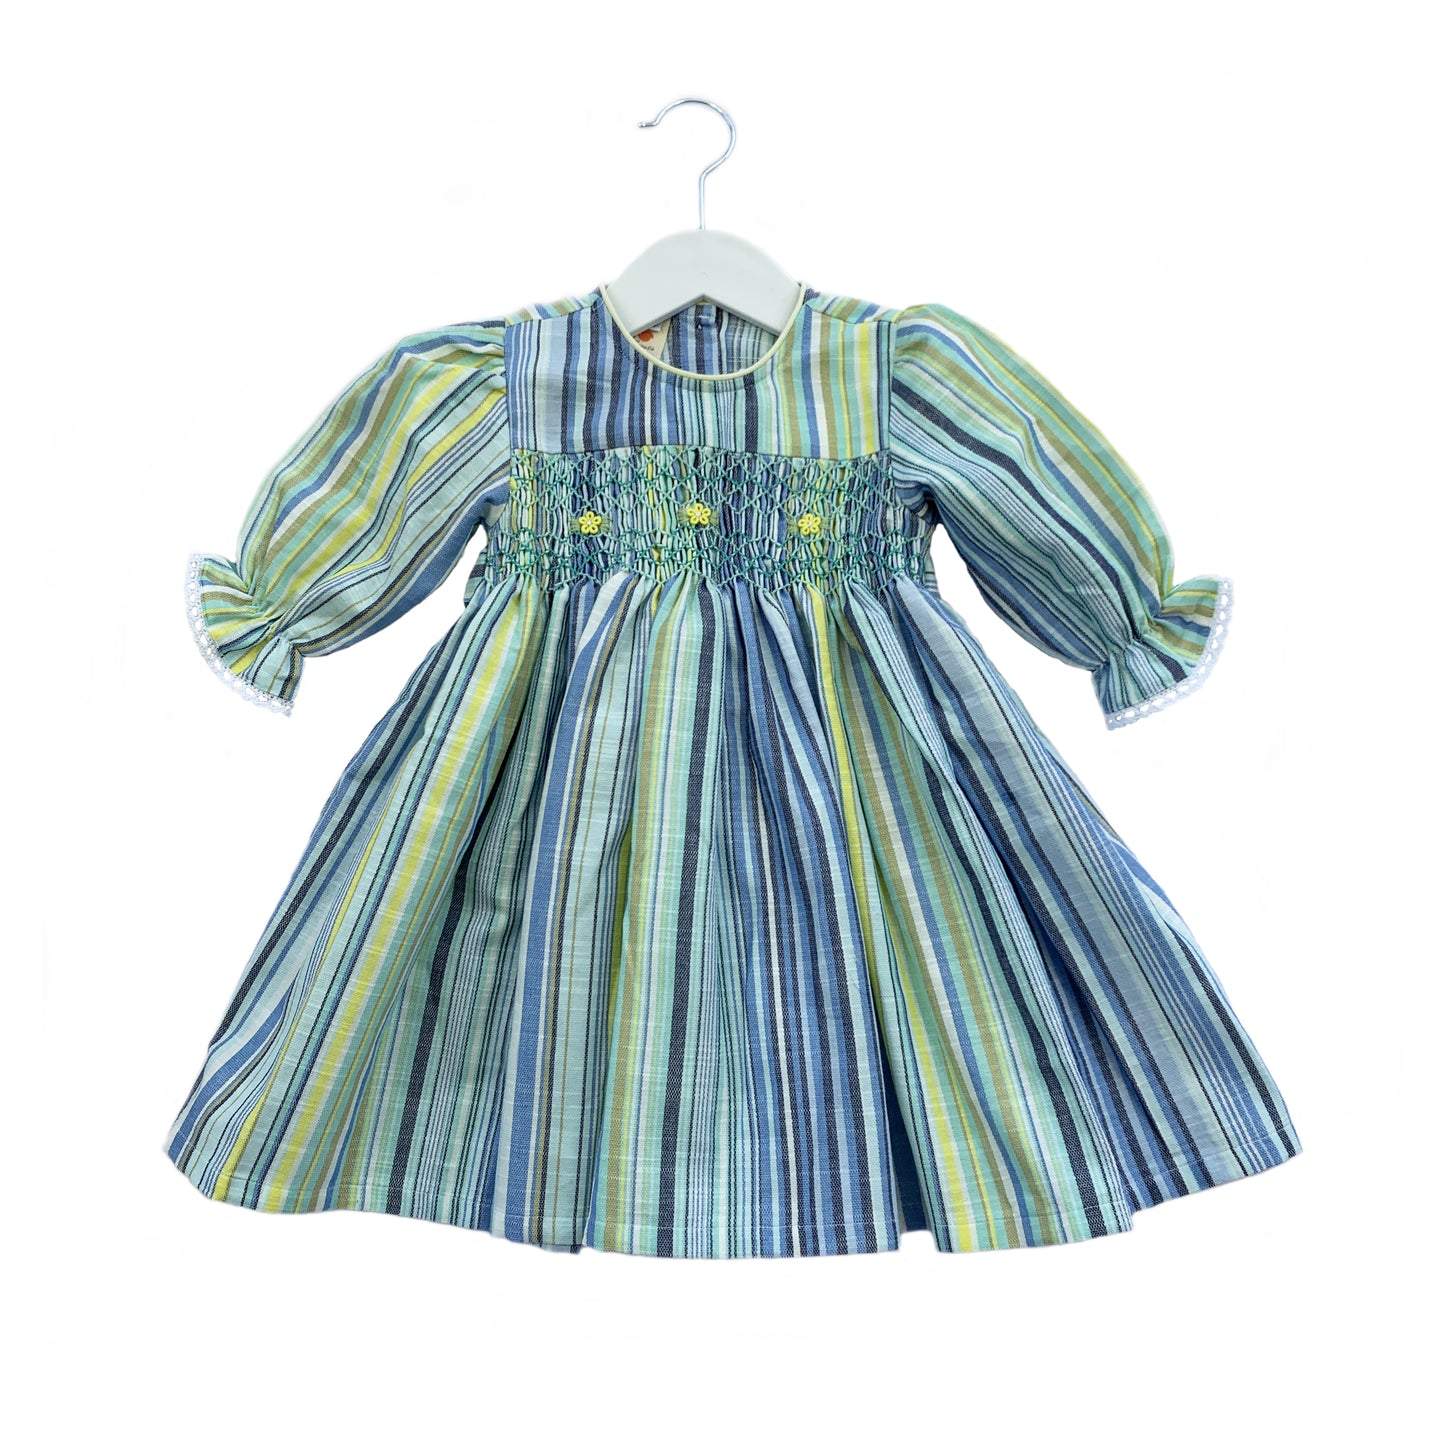 Tasteful long sleeves yellow and blue striped smocked dress.